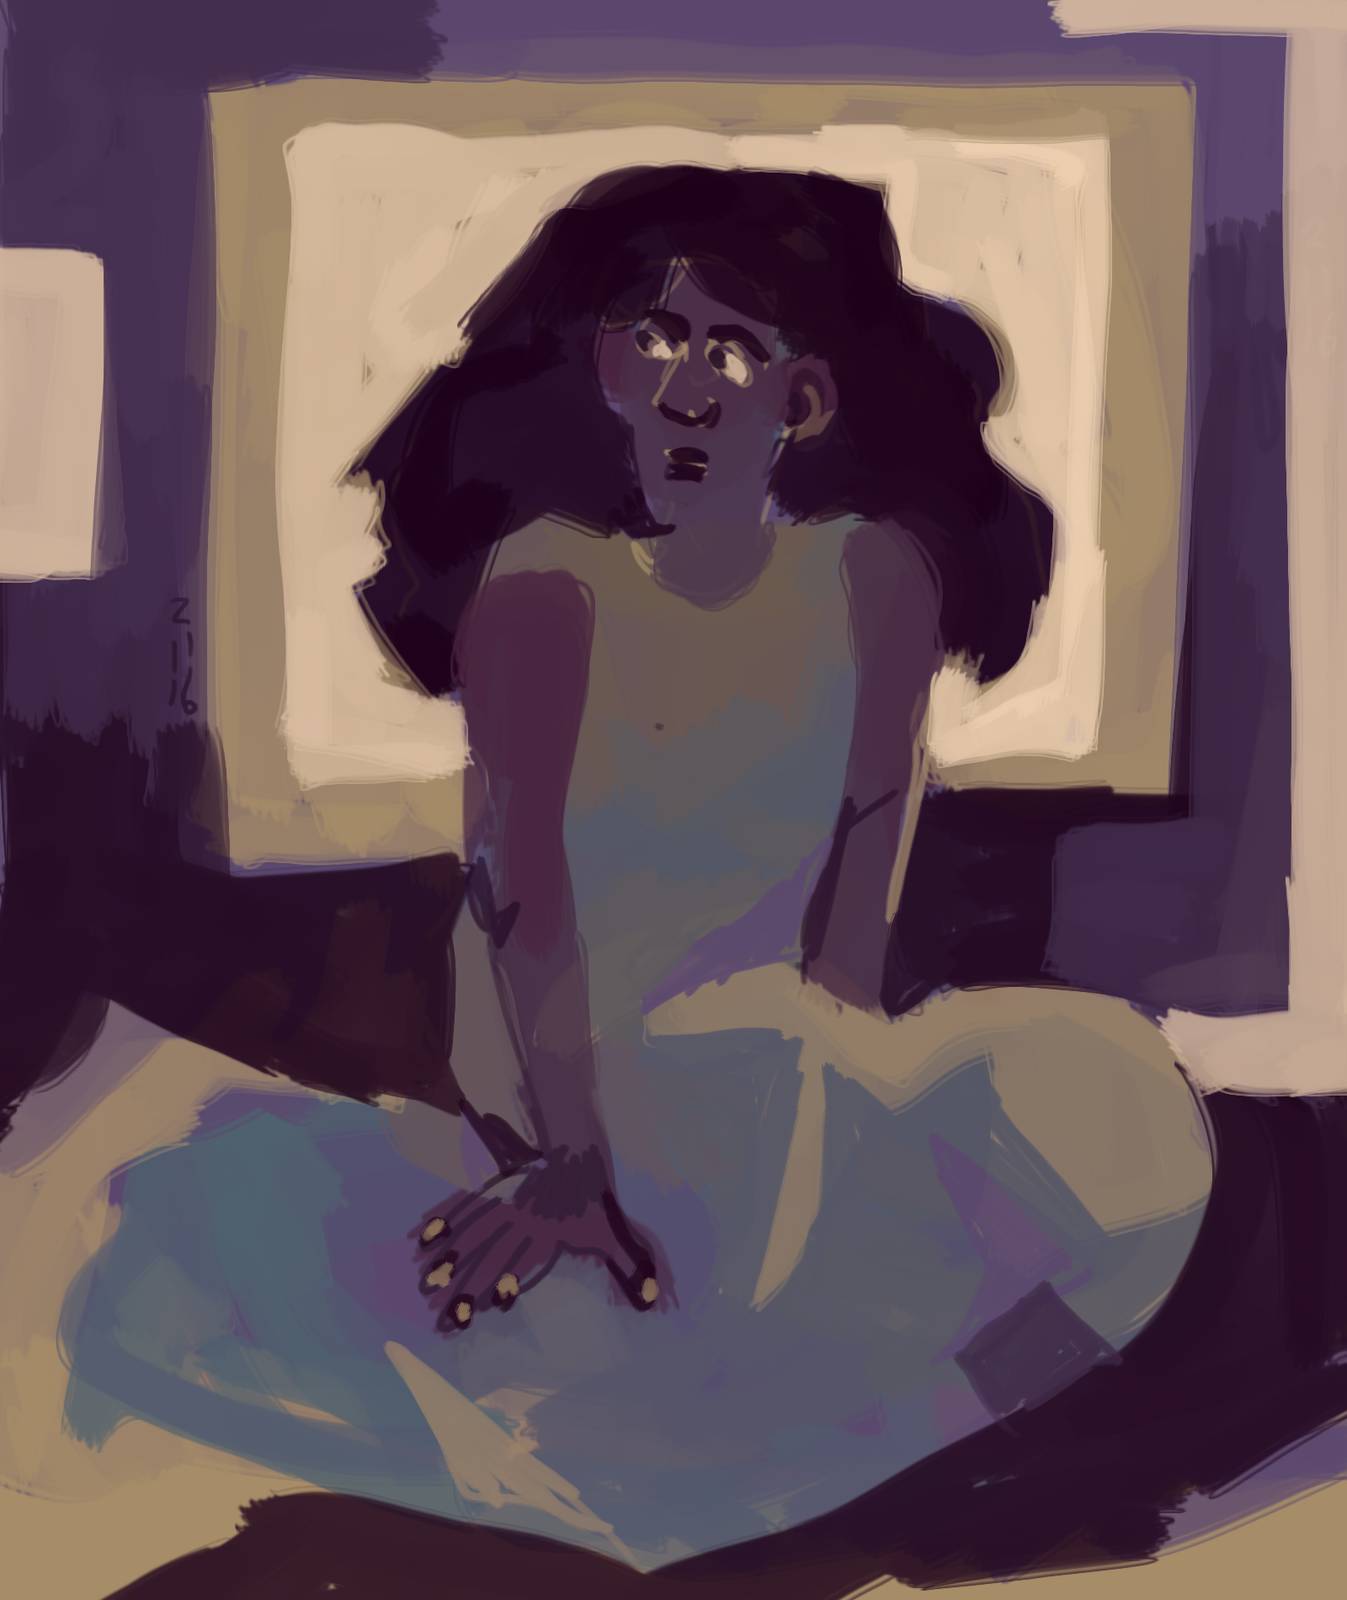 dark skinned person sitting in a dress on the ground, their upper body and head framed by a light square